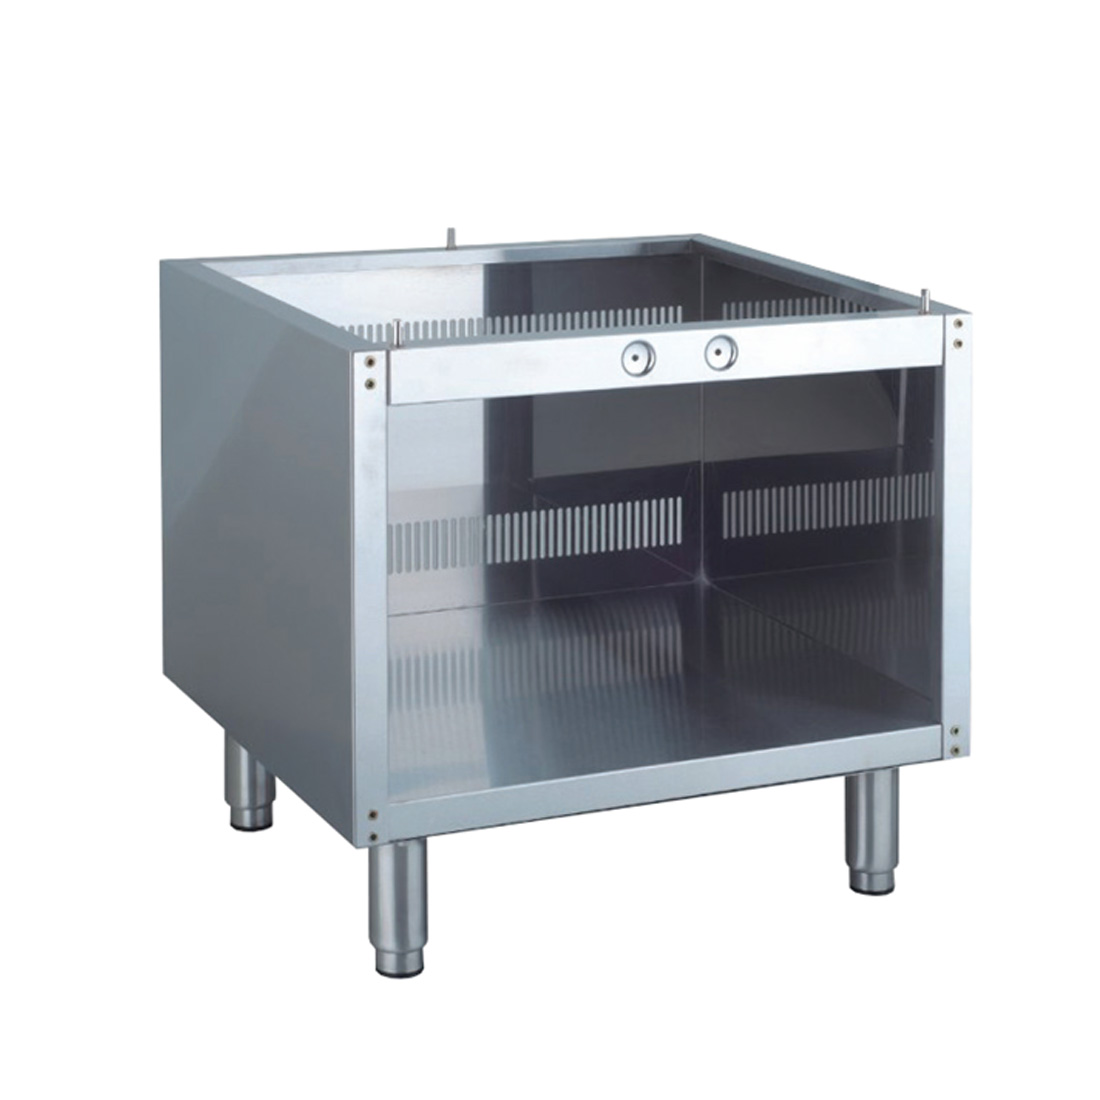 JUS600 â€“ Cabinet Stand for Gas Max JUS Range 600mm